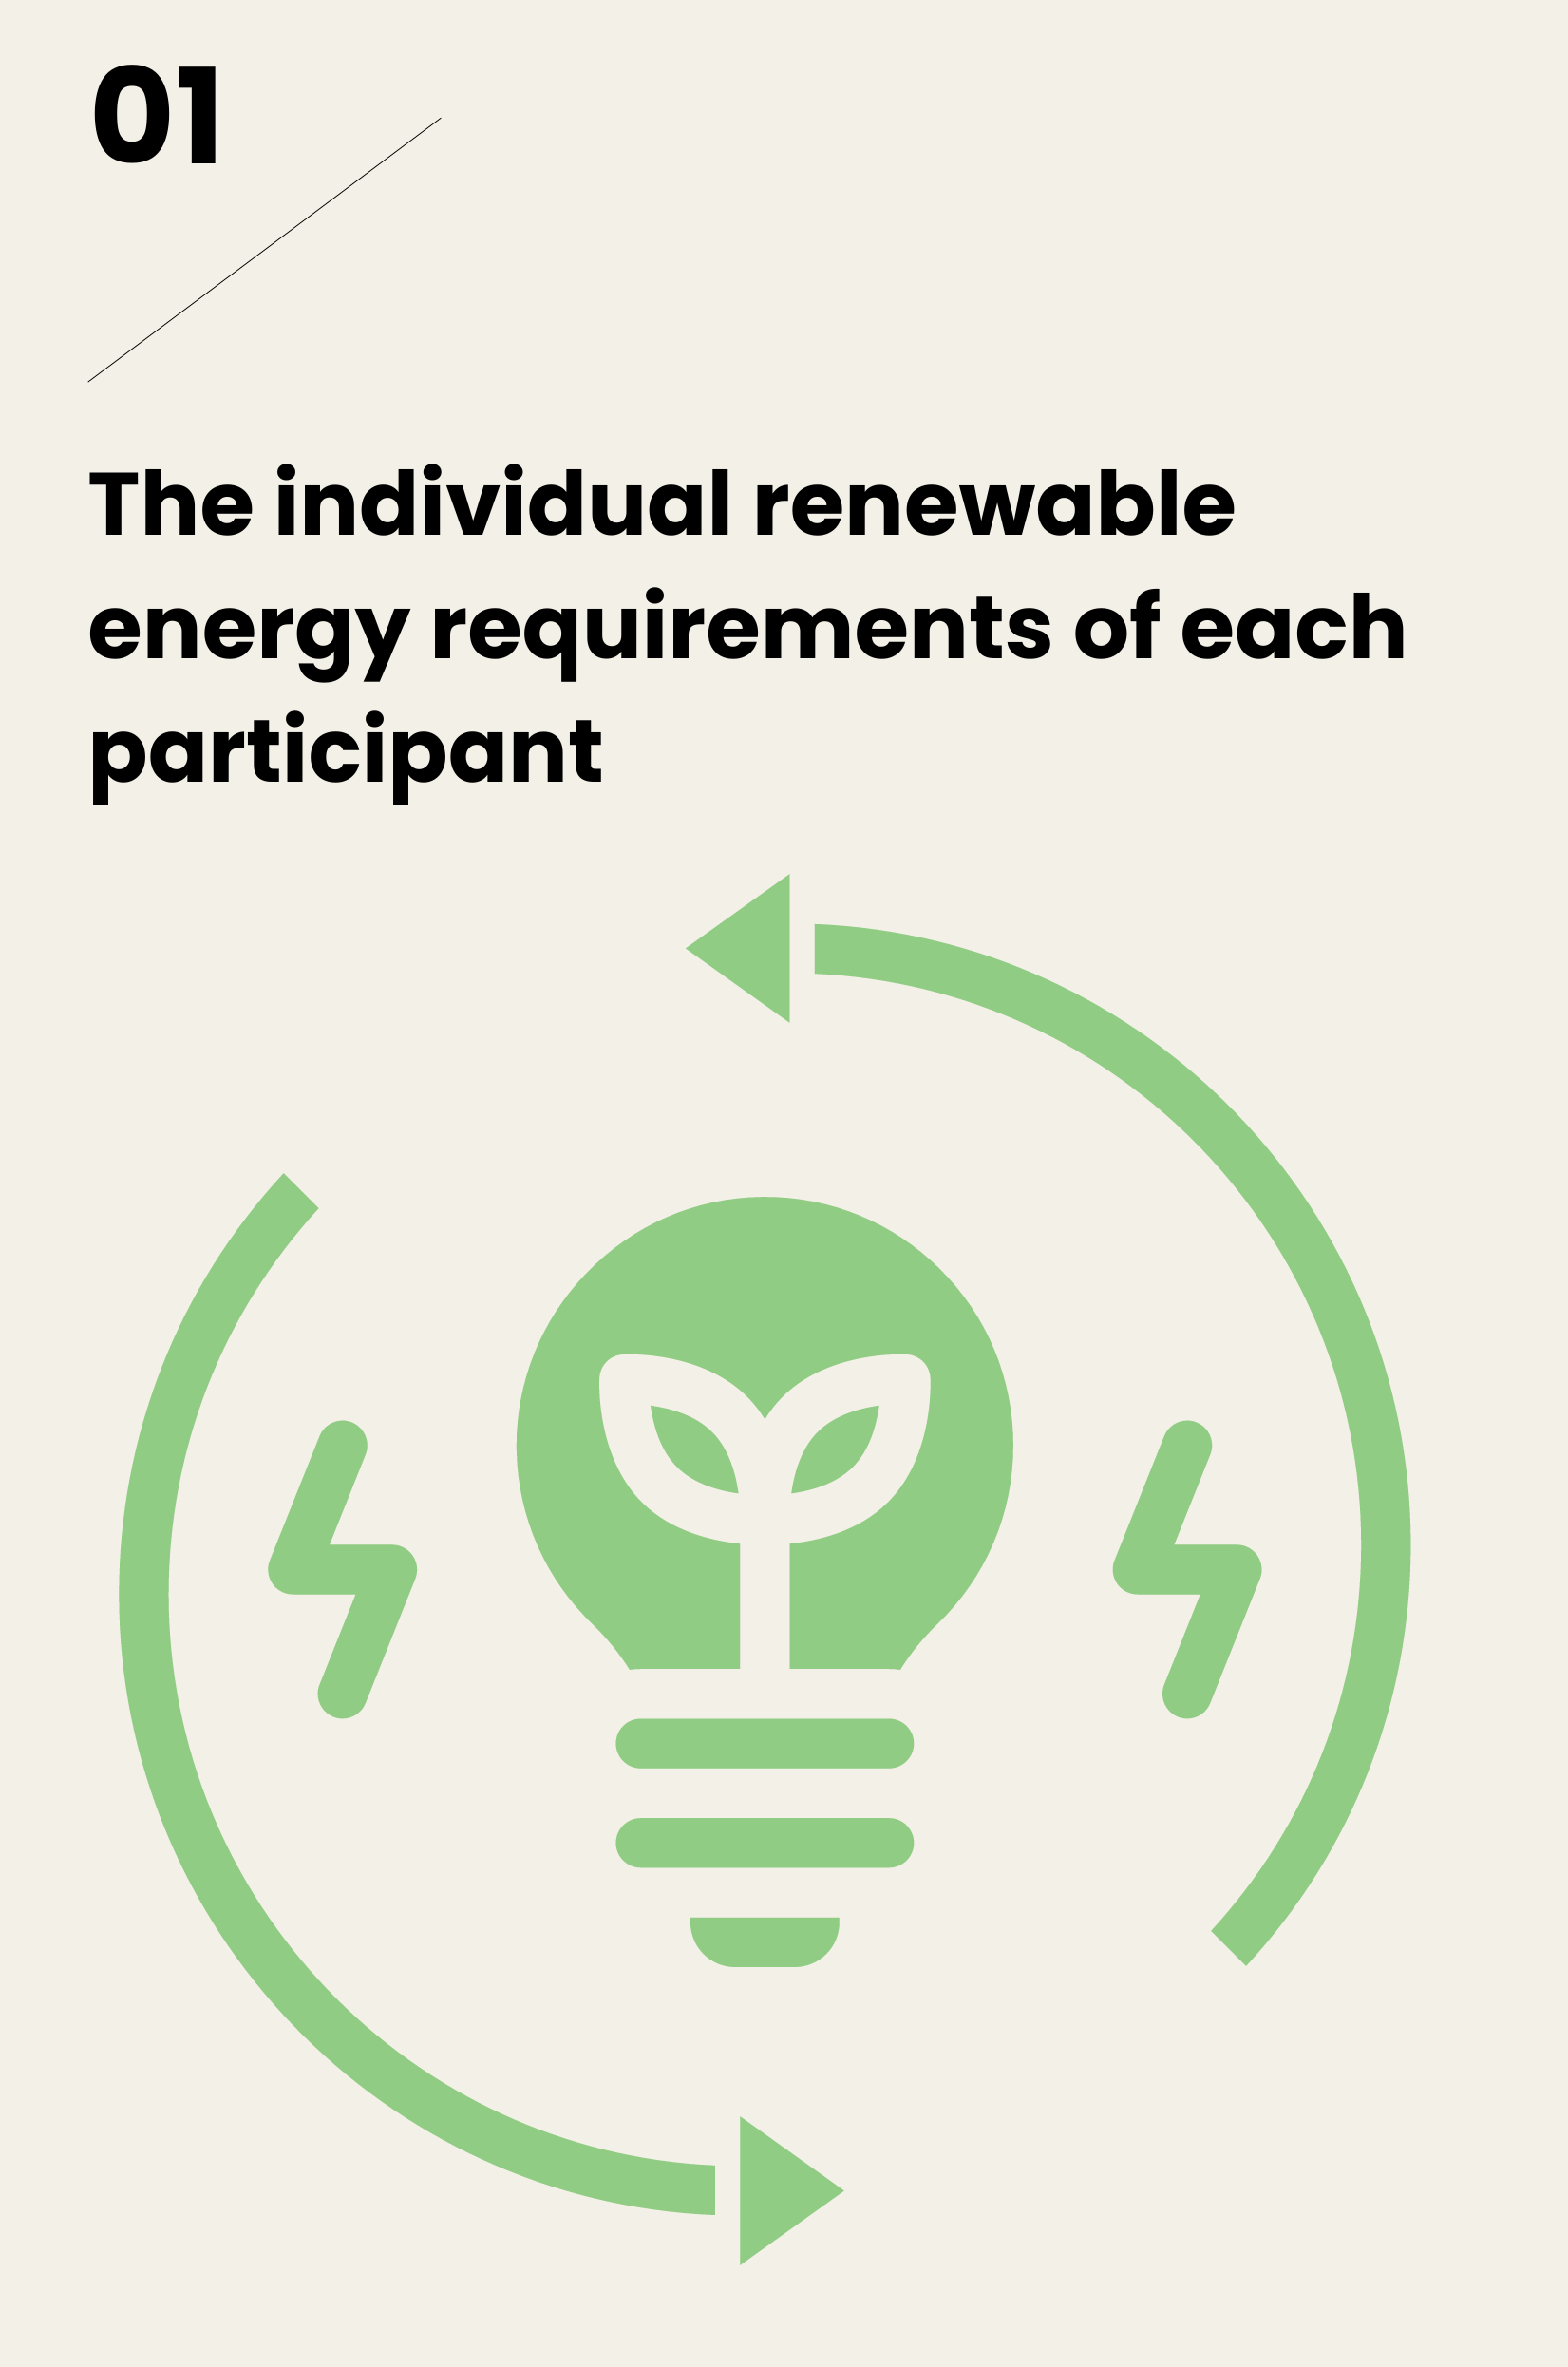 The individual renewable energy requirements of each participant